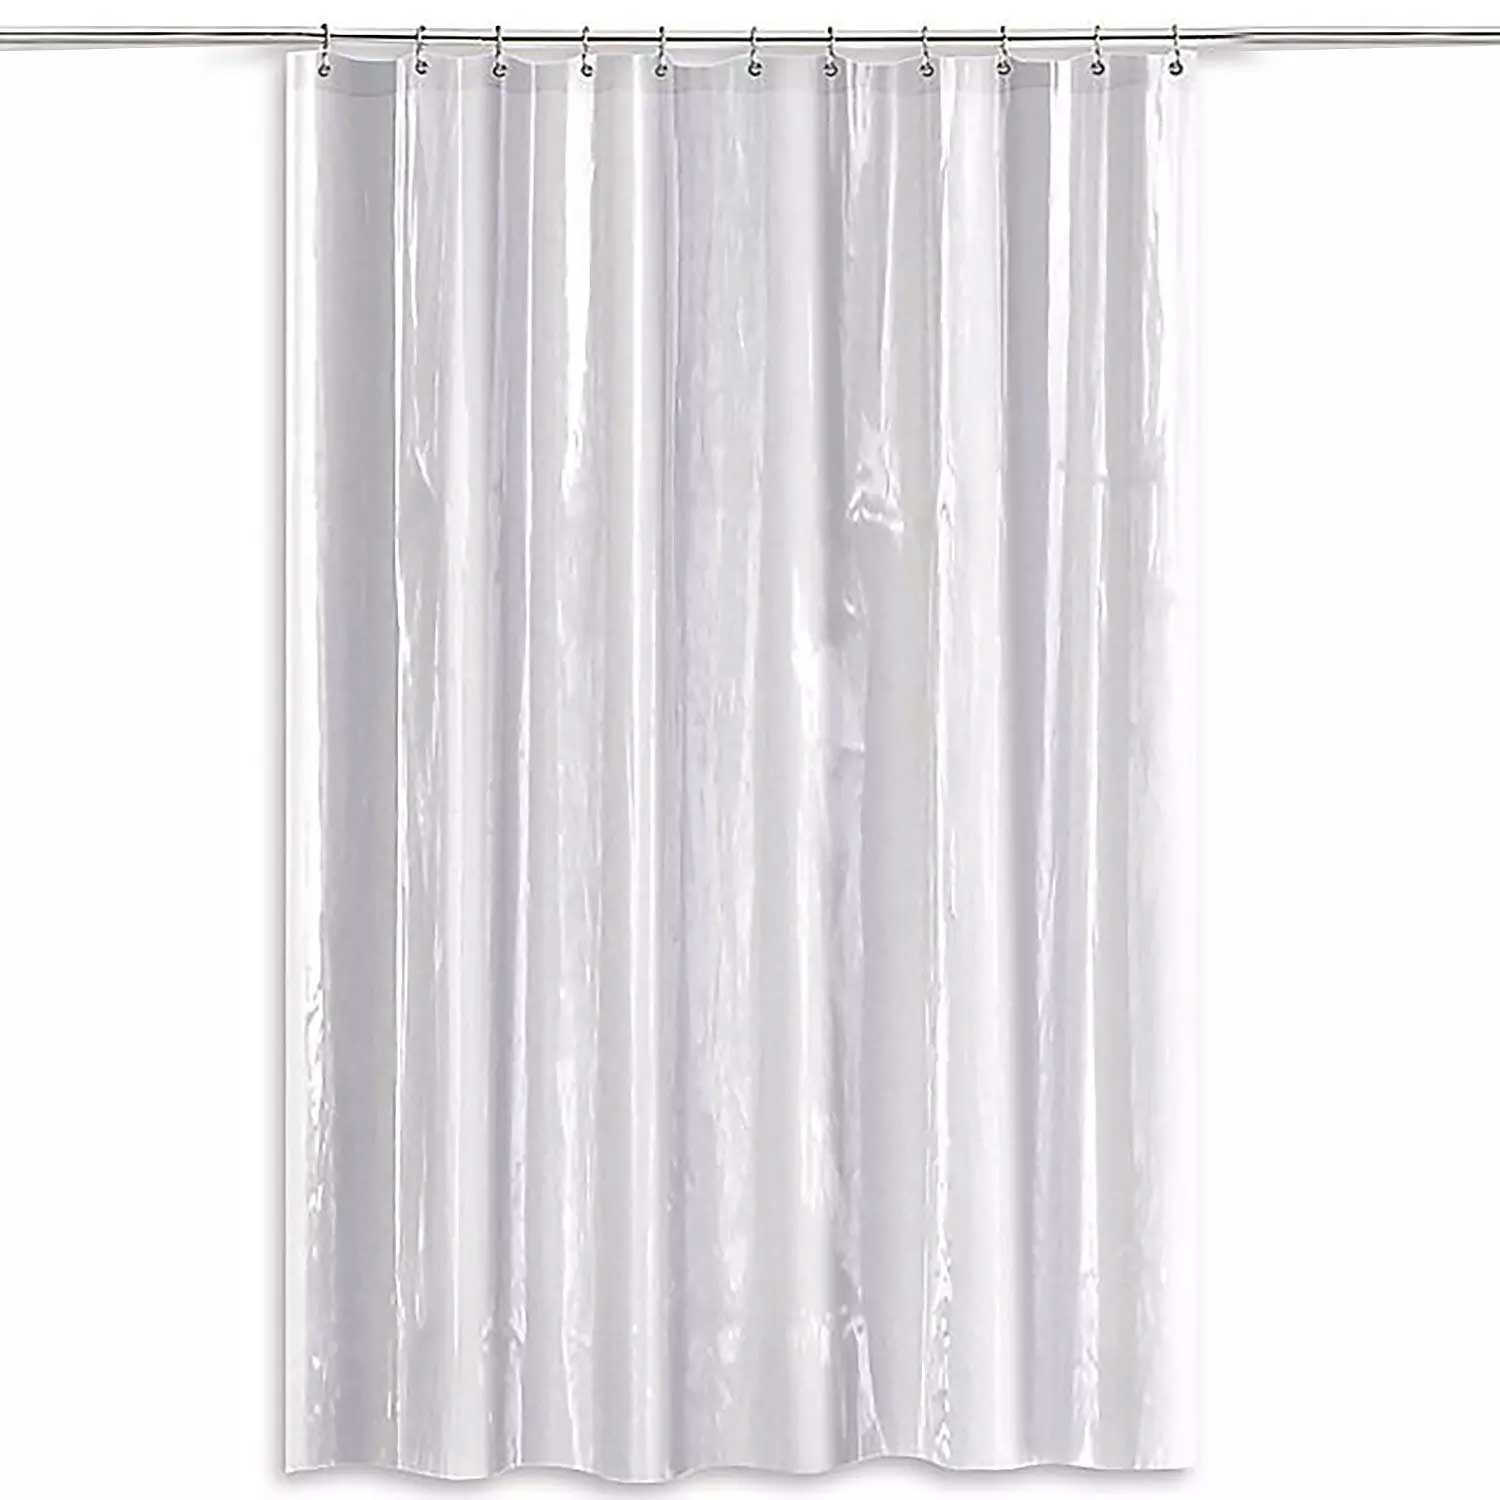 Hotel by Domay - Shower curtain liner, heavy duty, 70"x71", clear